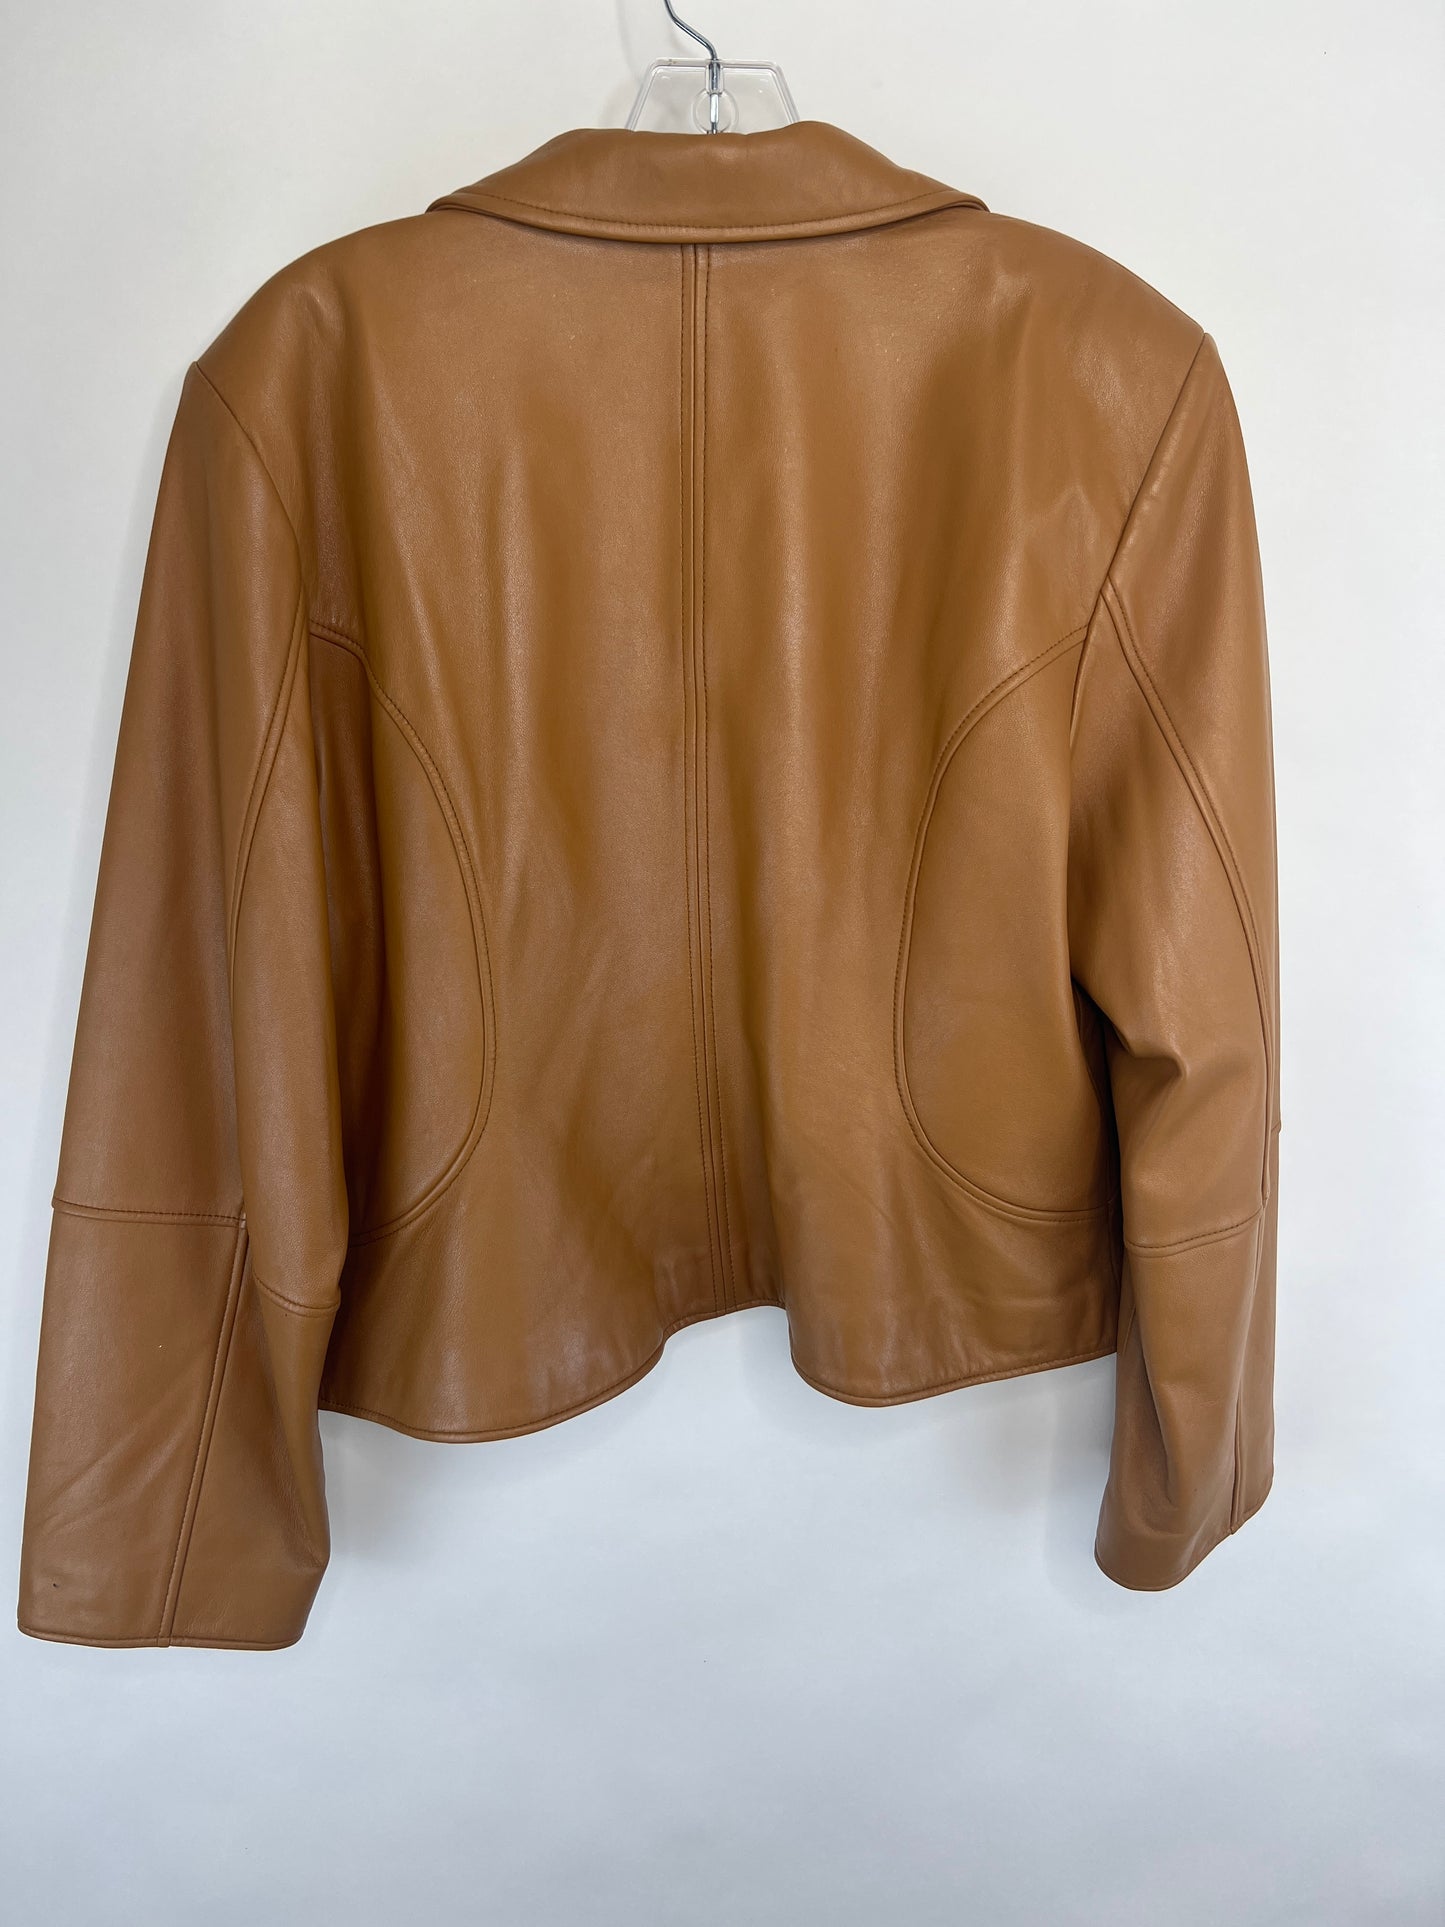 Terry Lewis Classic Luxuries Camel Genuine Leather Jacket - L